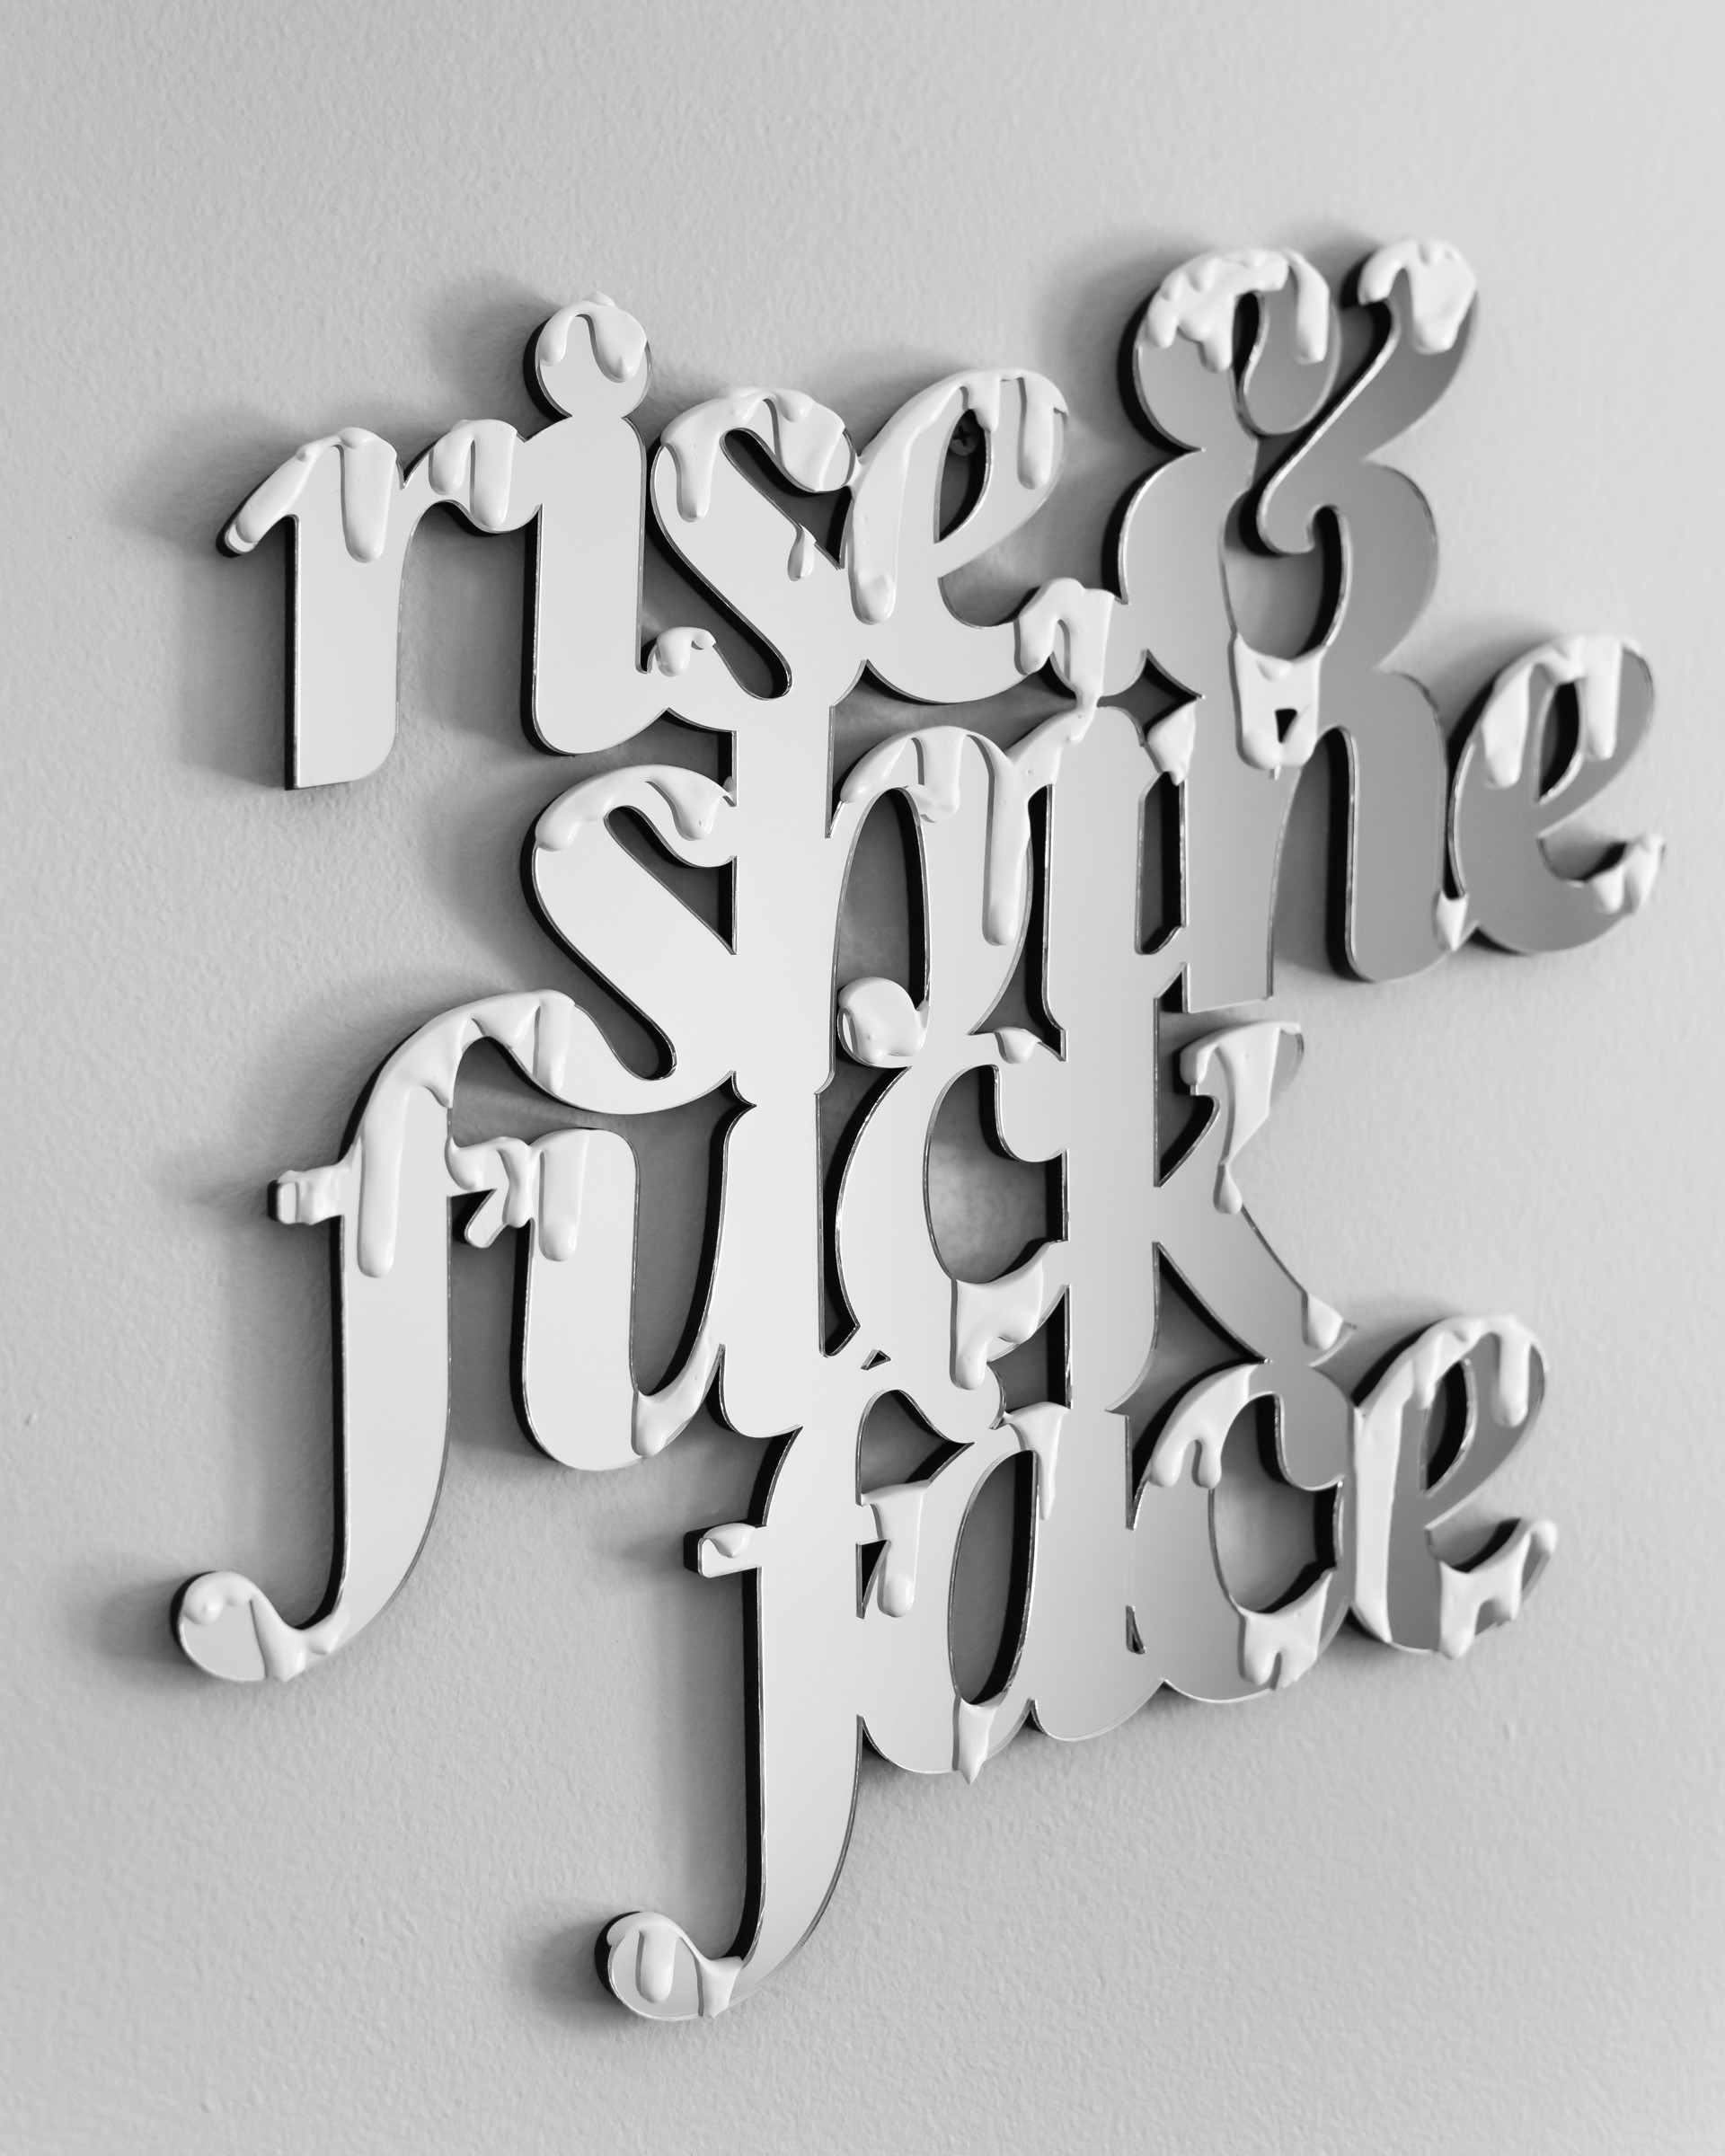 Rise & Shine F**** Face by Ryan Labrosse